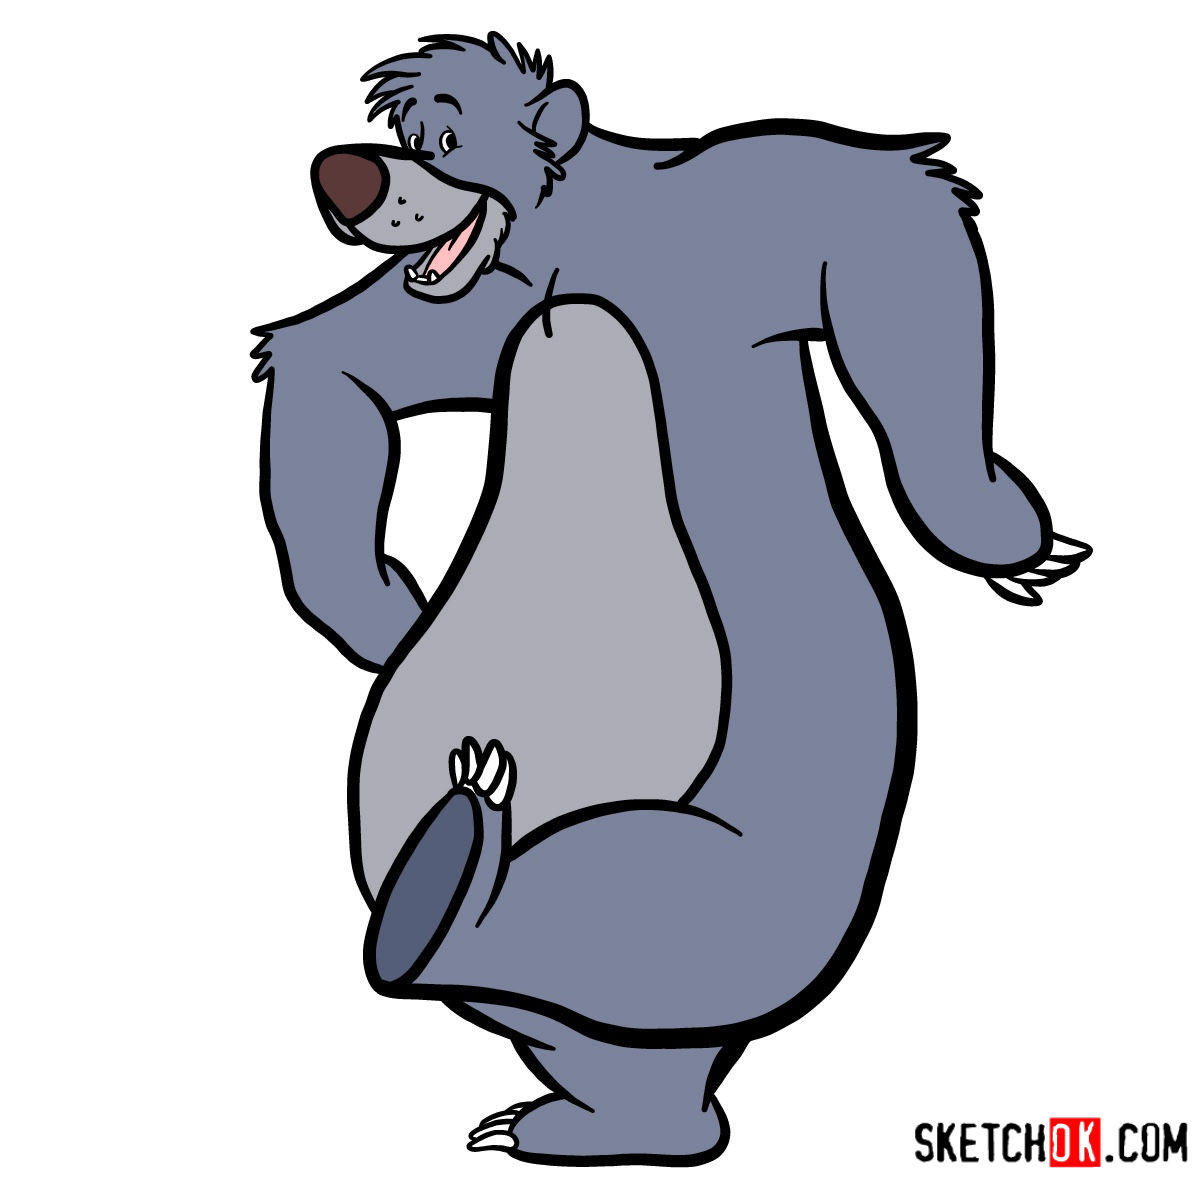 How to draw Baloo from the Jungle Book